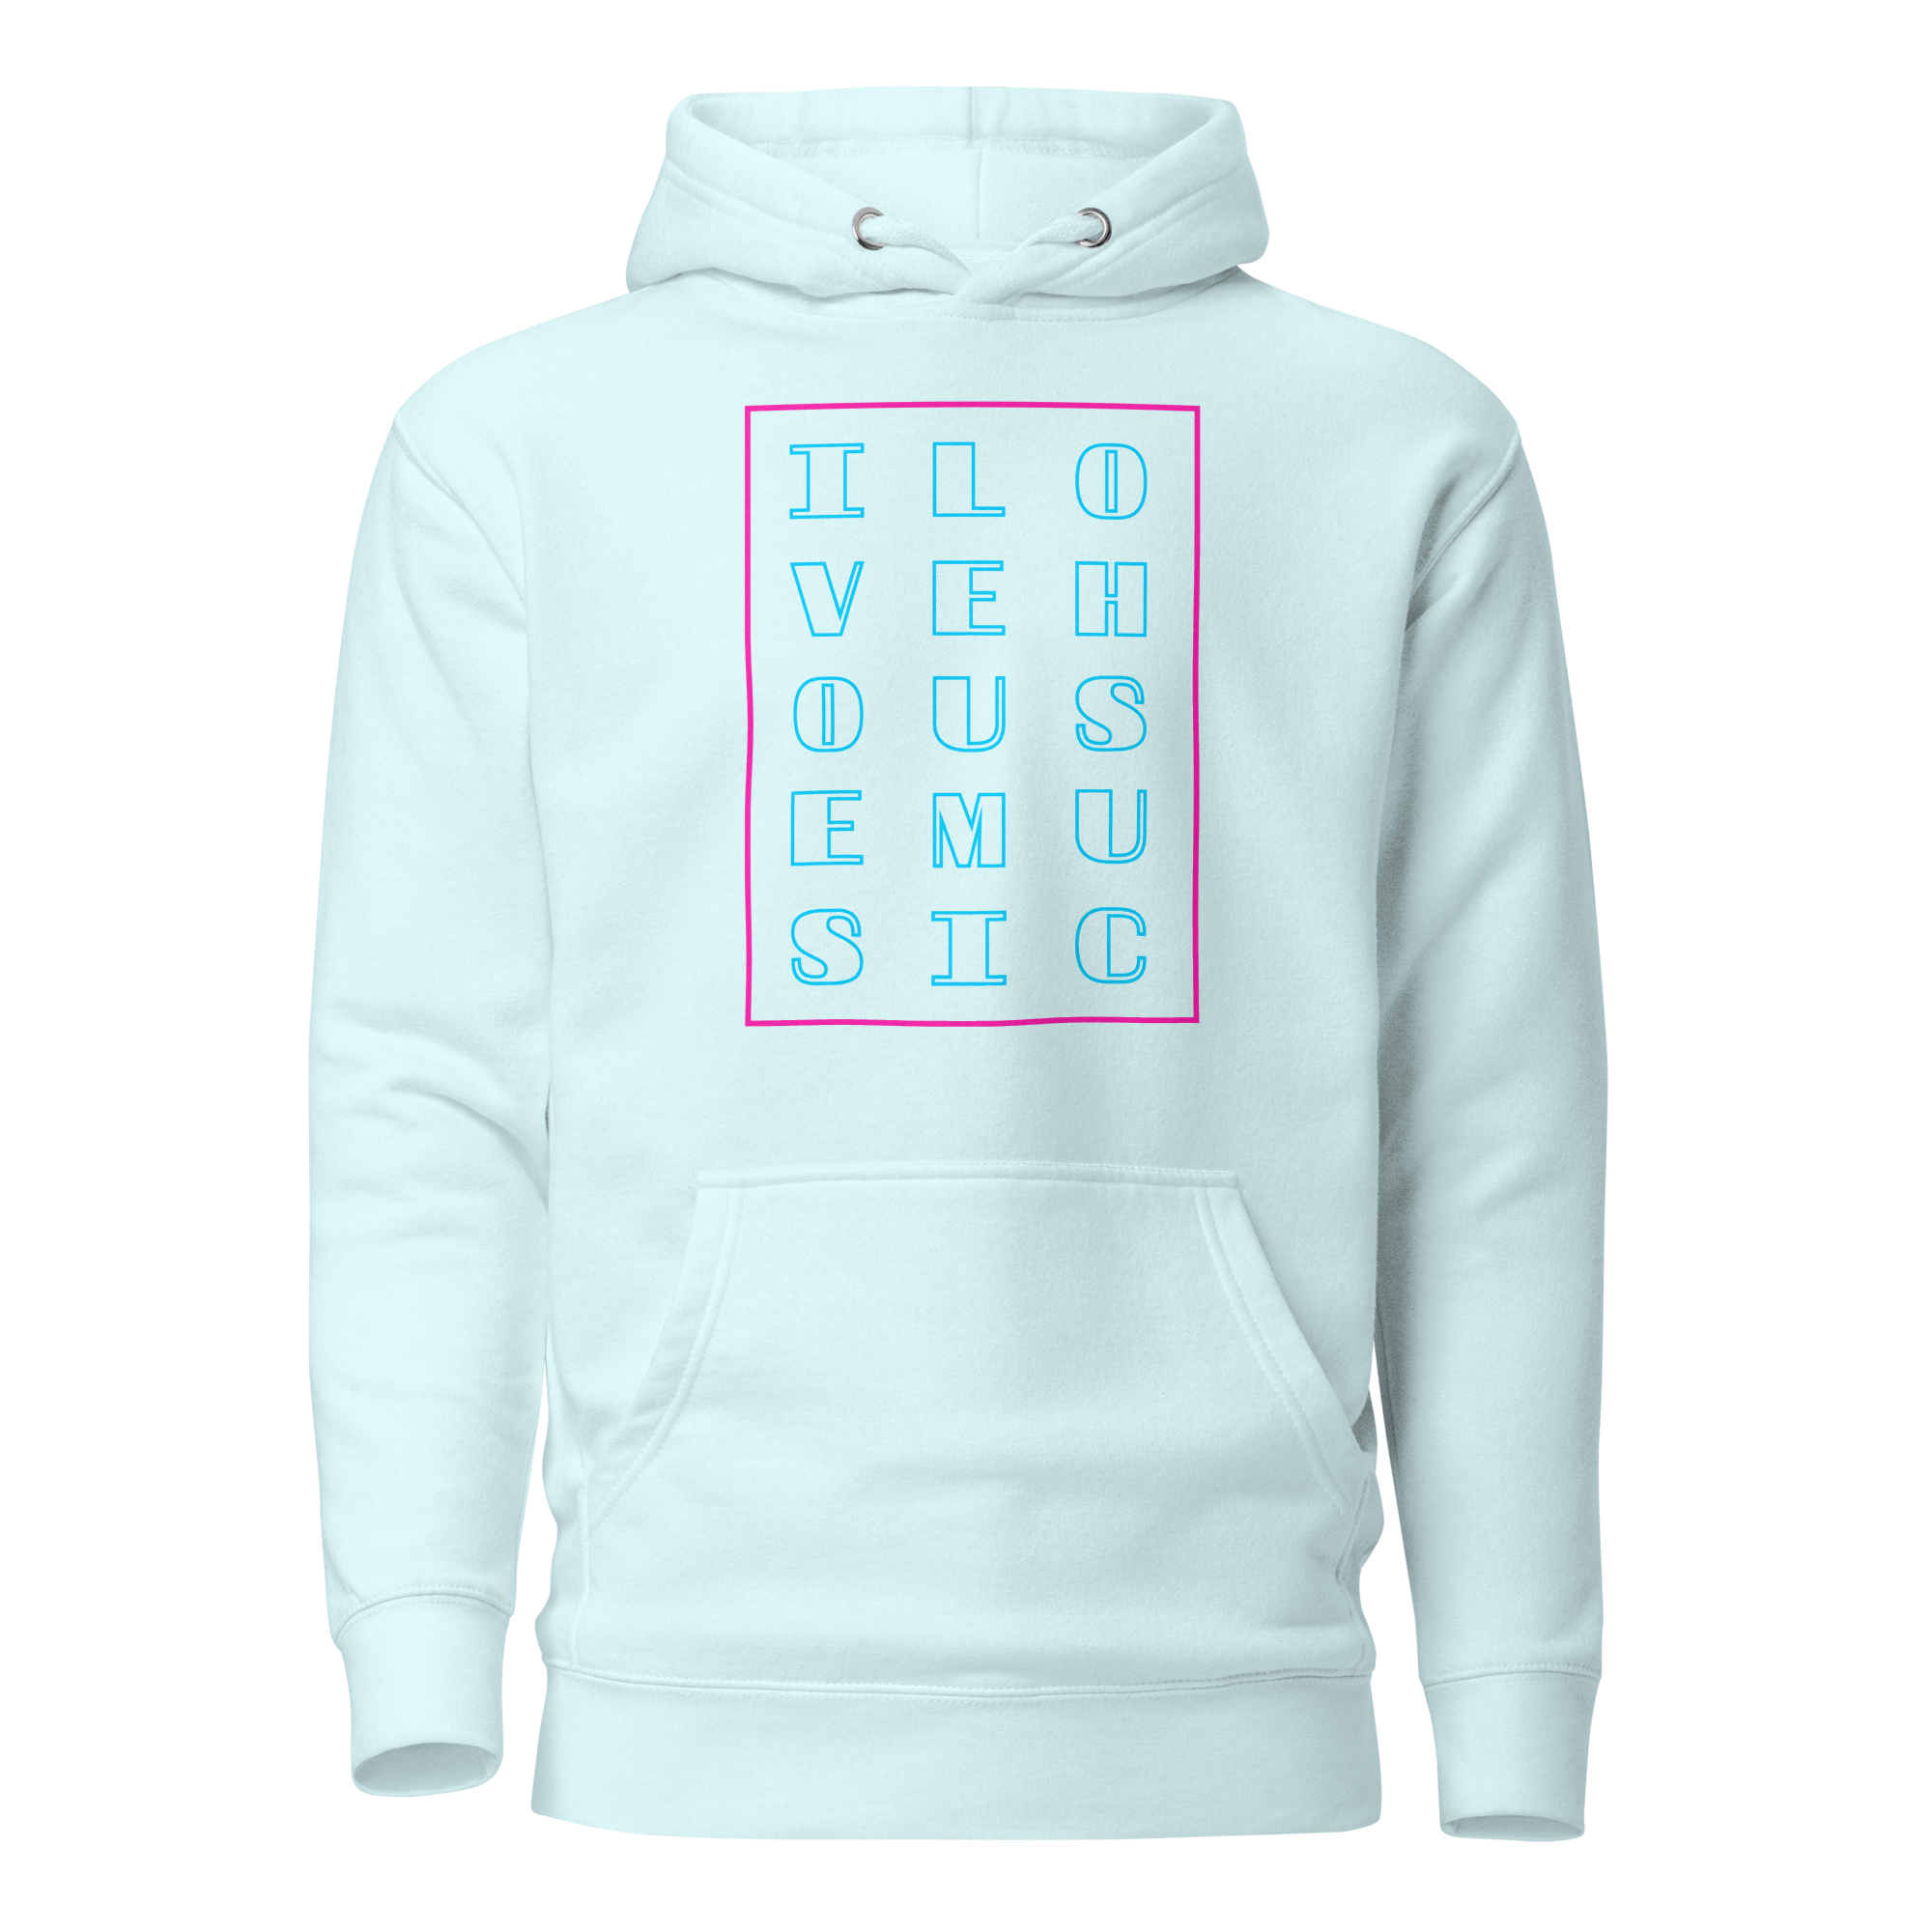 Powder Blue I Love House Music Graphic Hoodie Front View